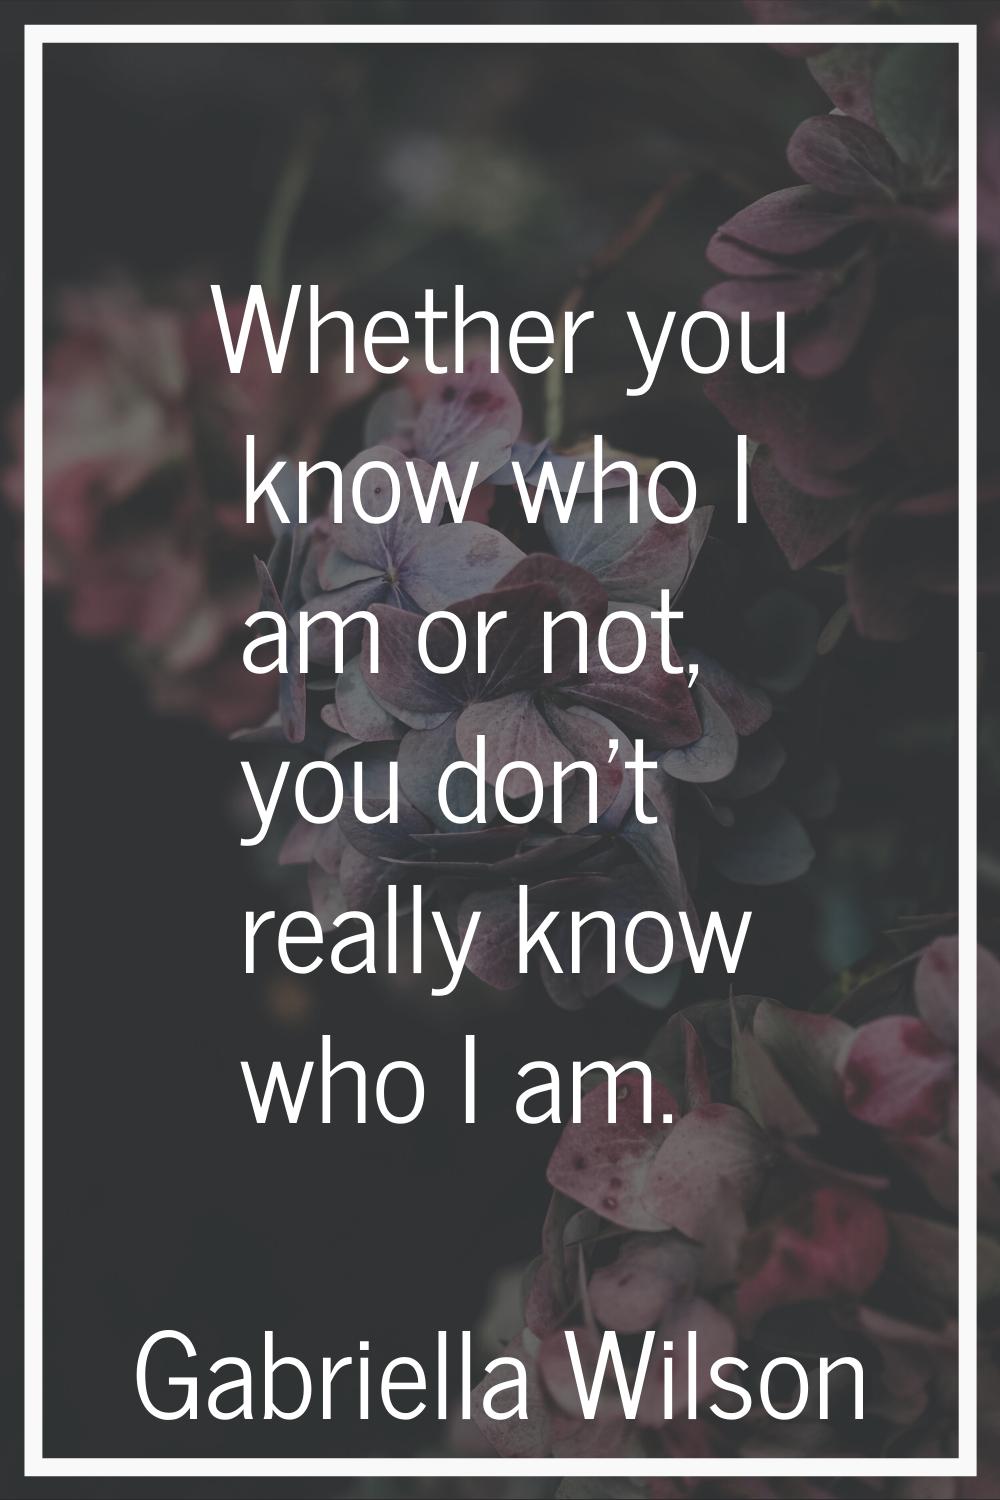 Whether you know who I am or not, you don't really know who I am.